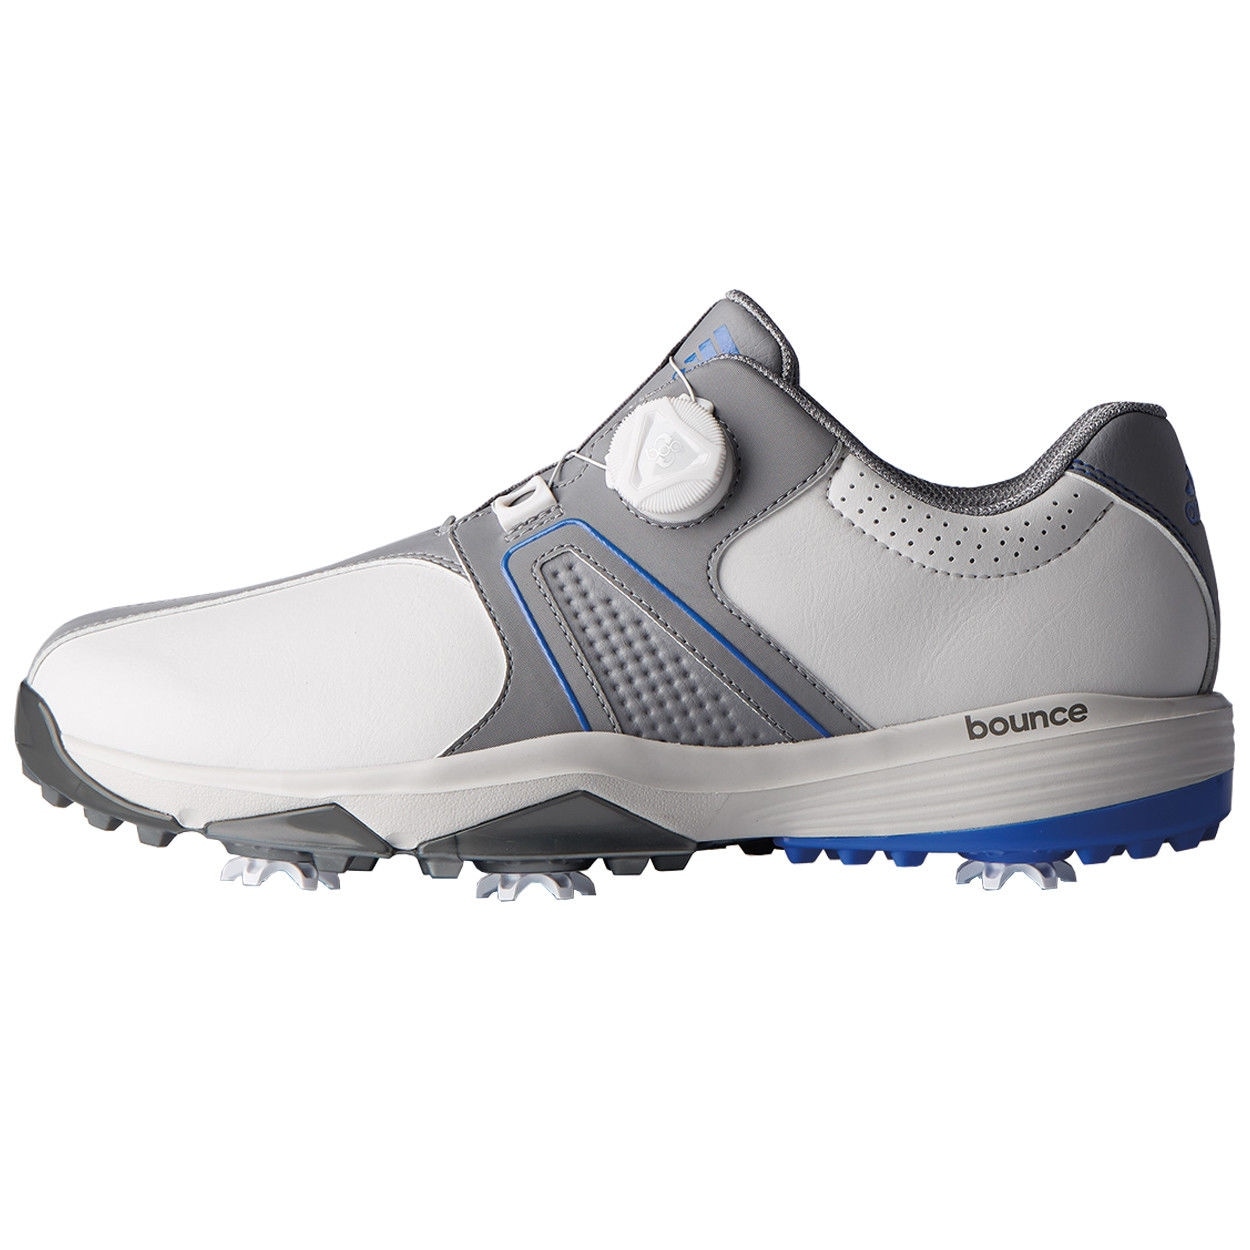 adidas men's 360 traxion golf shoes review